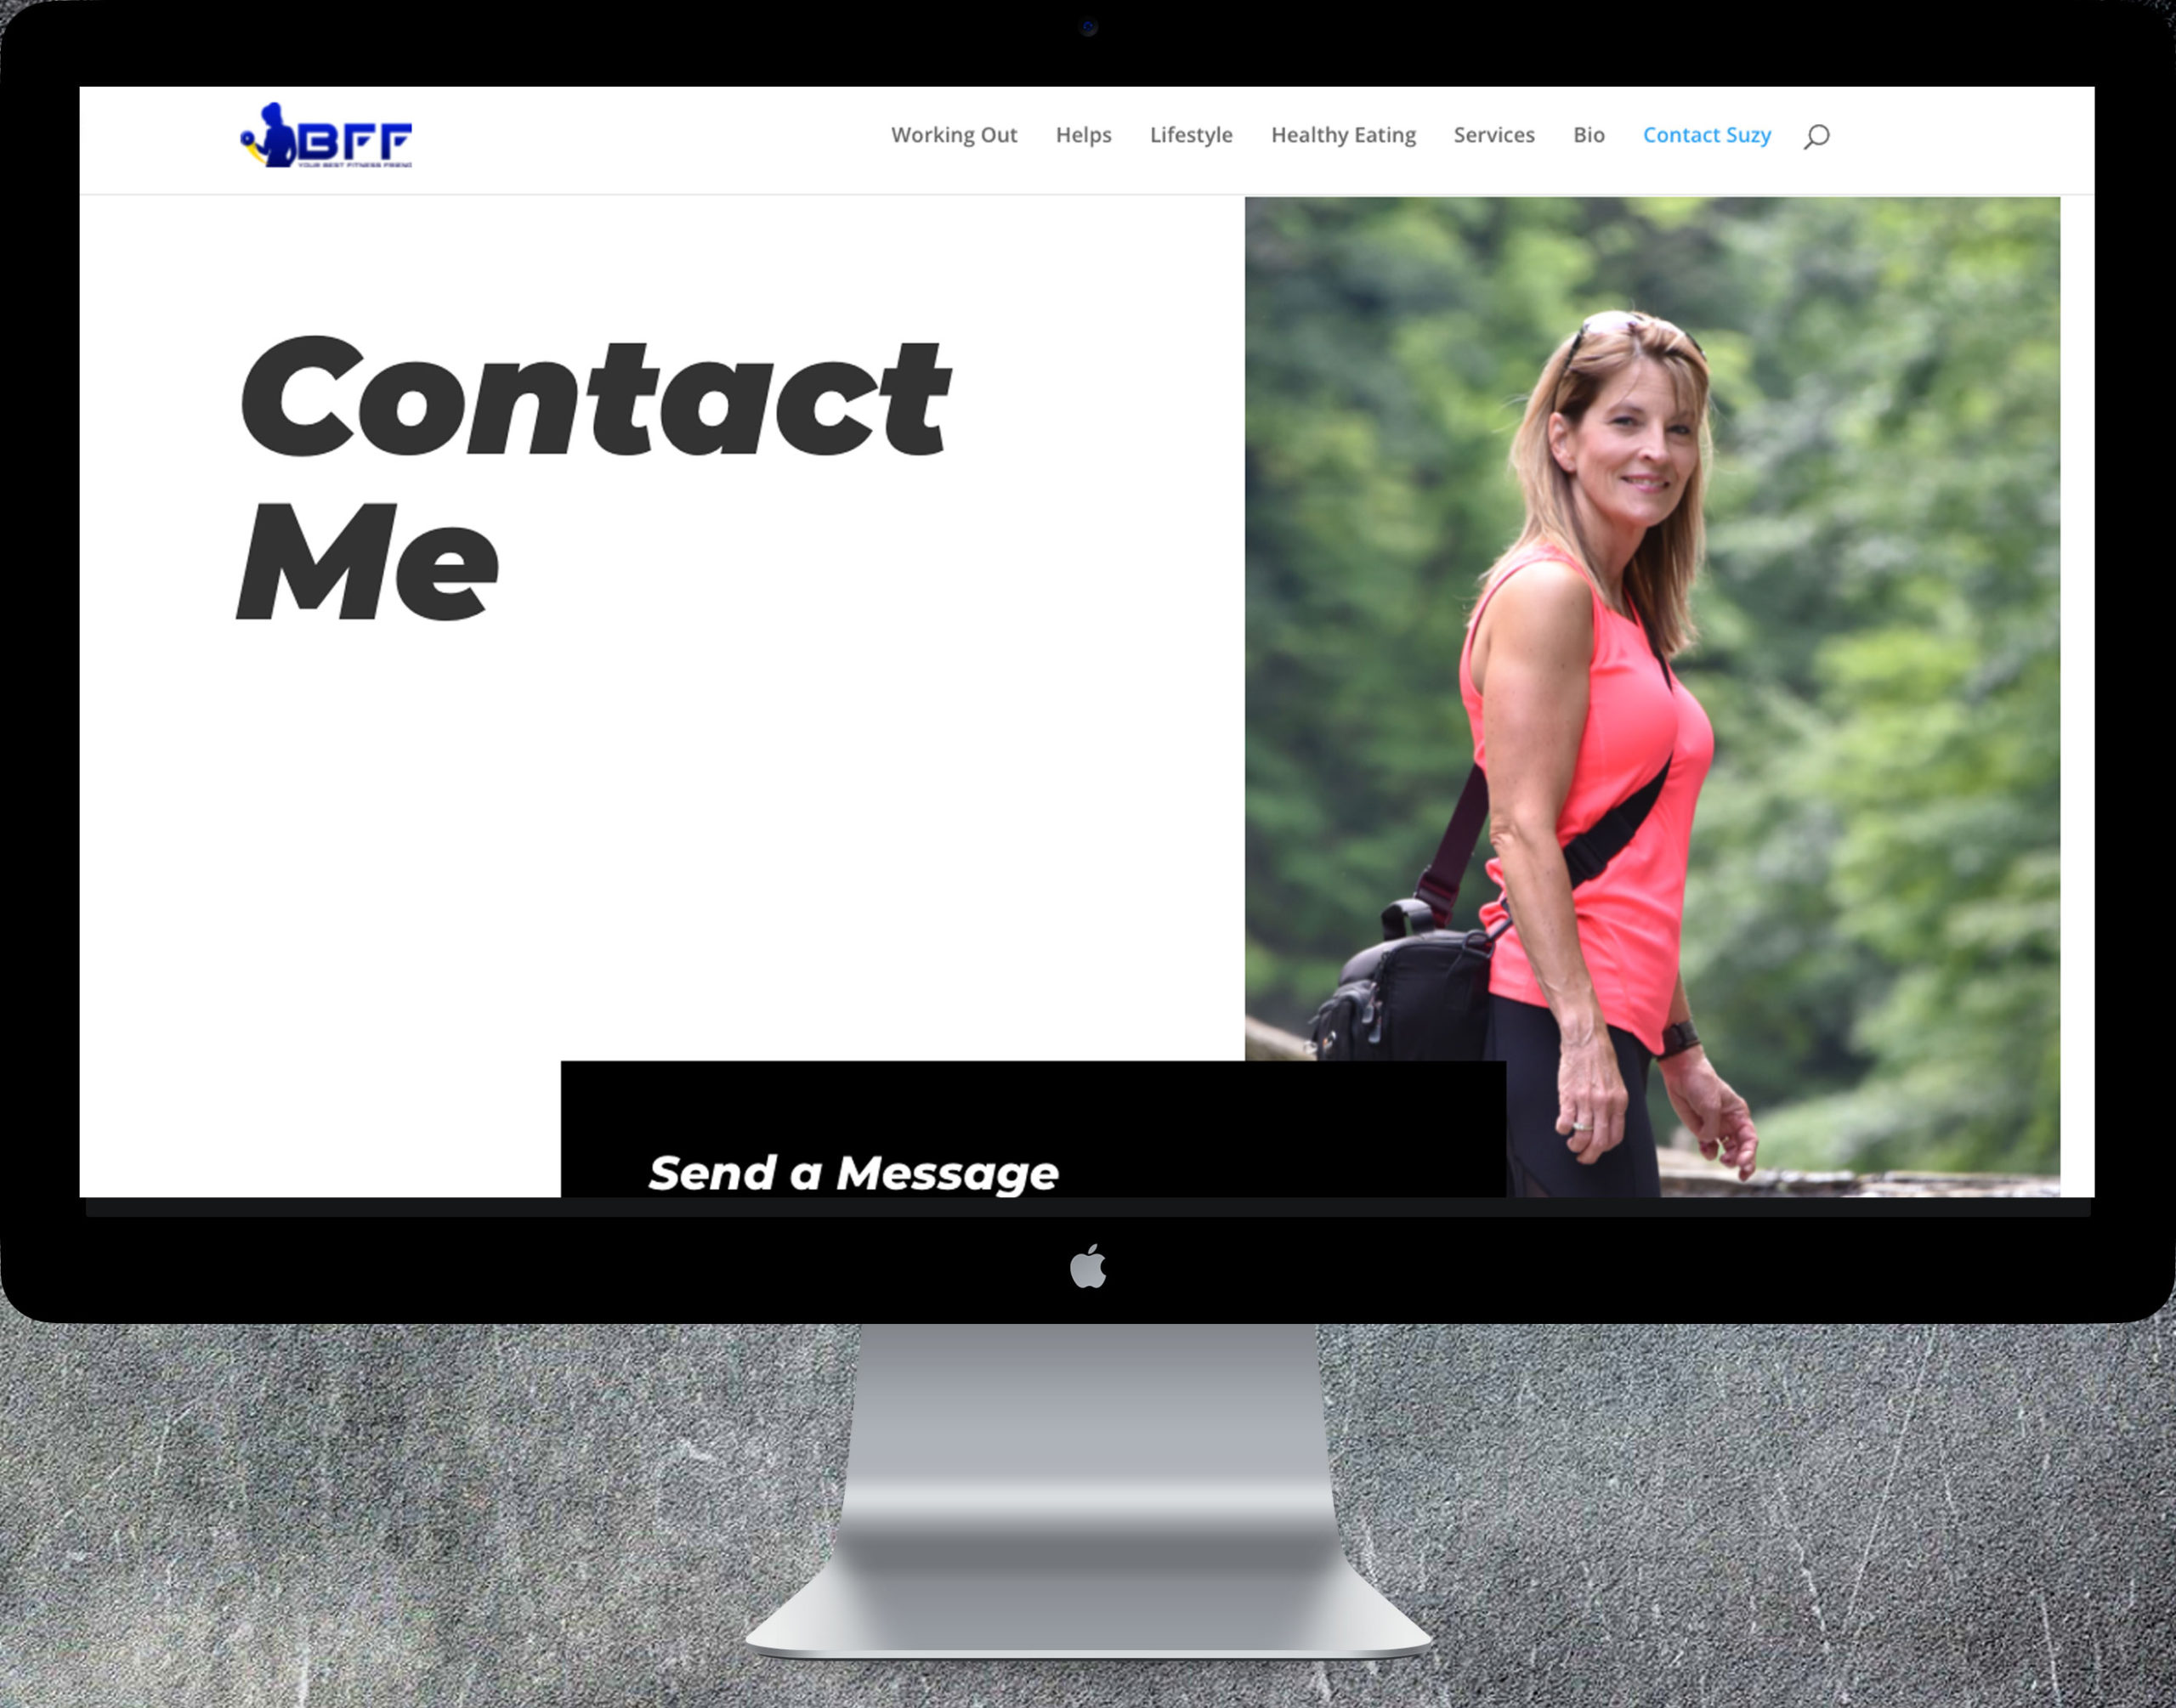 Im Your BFF contact page